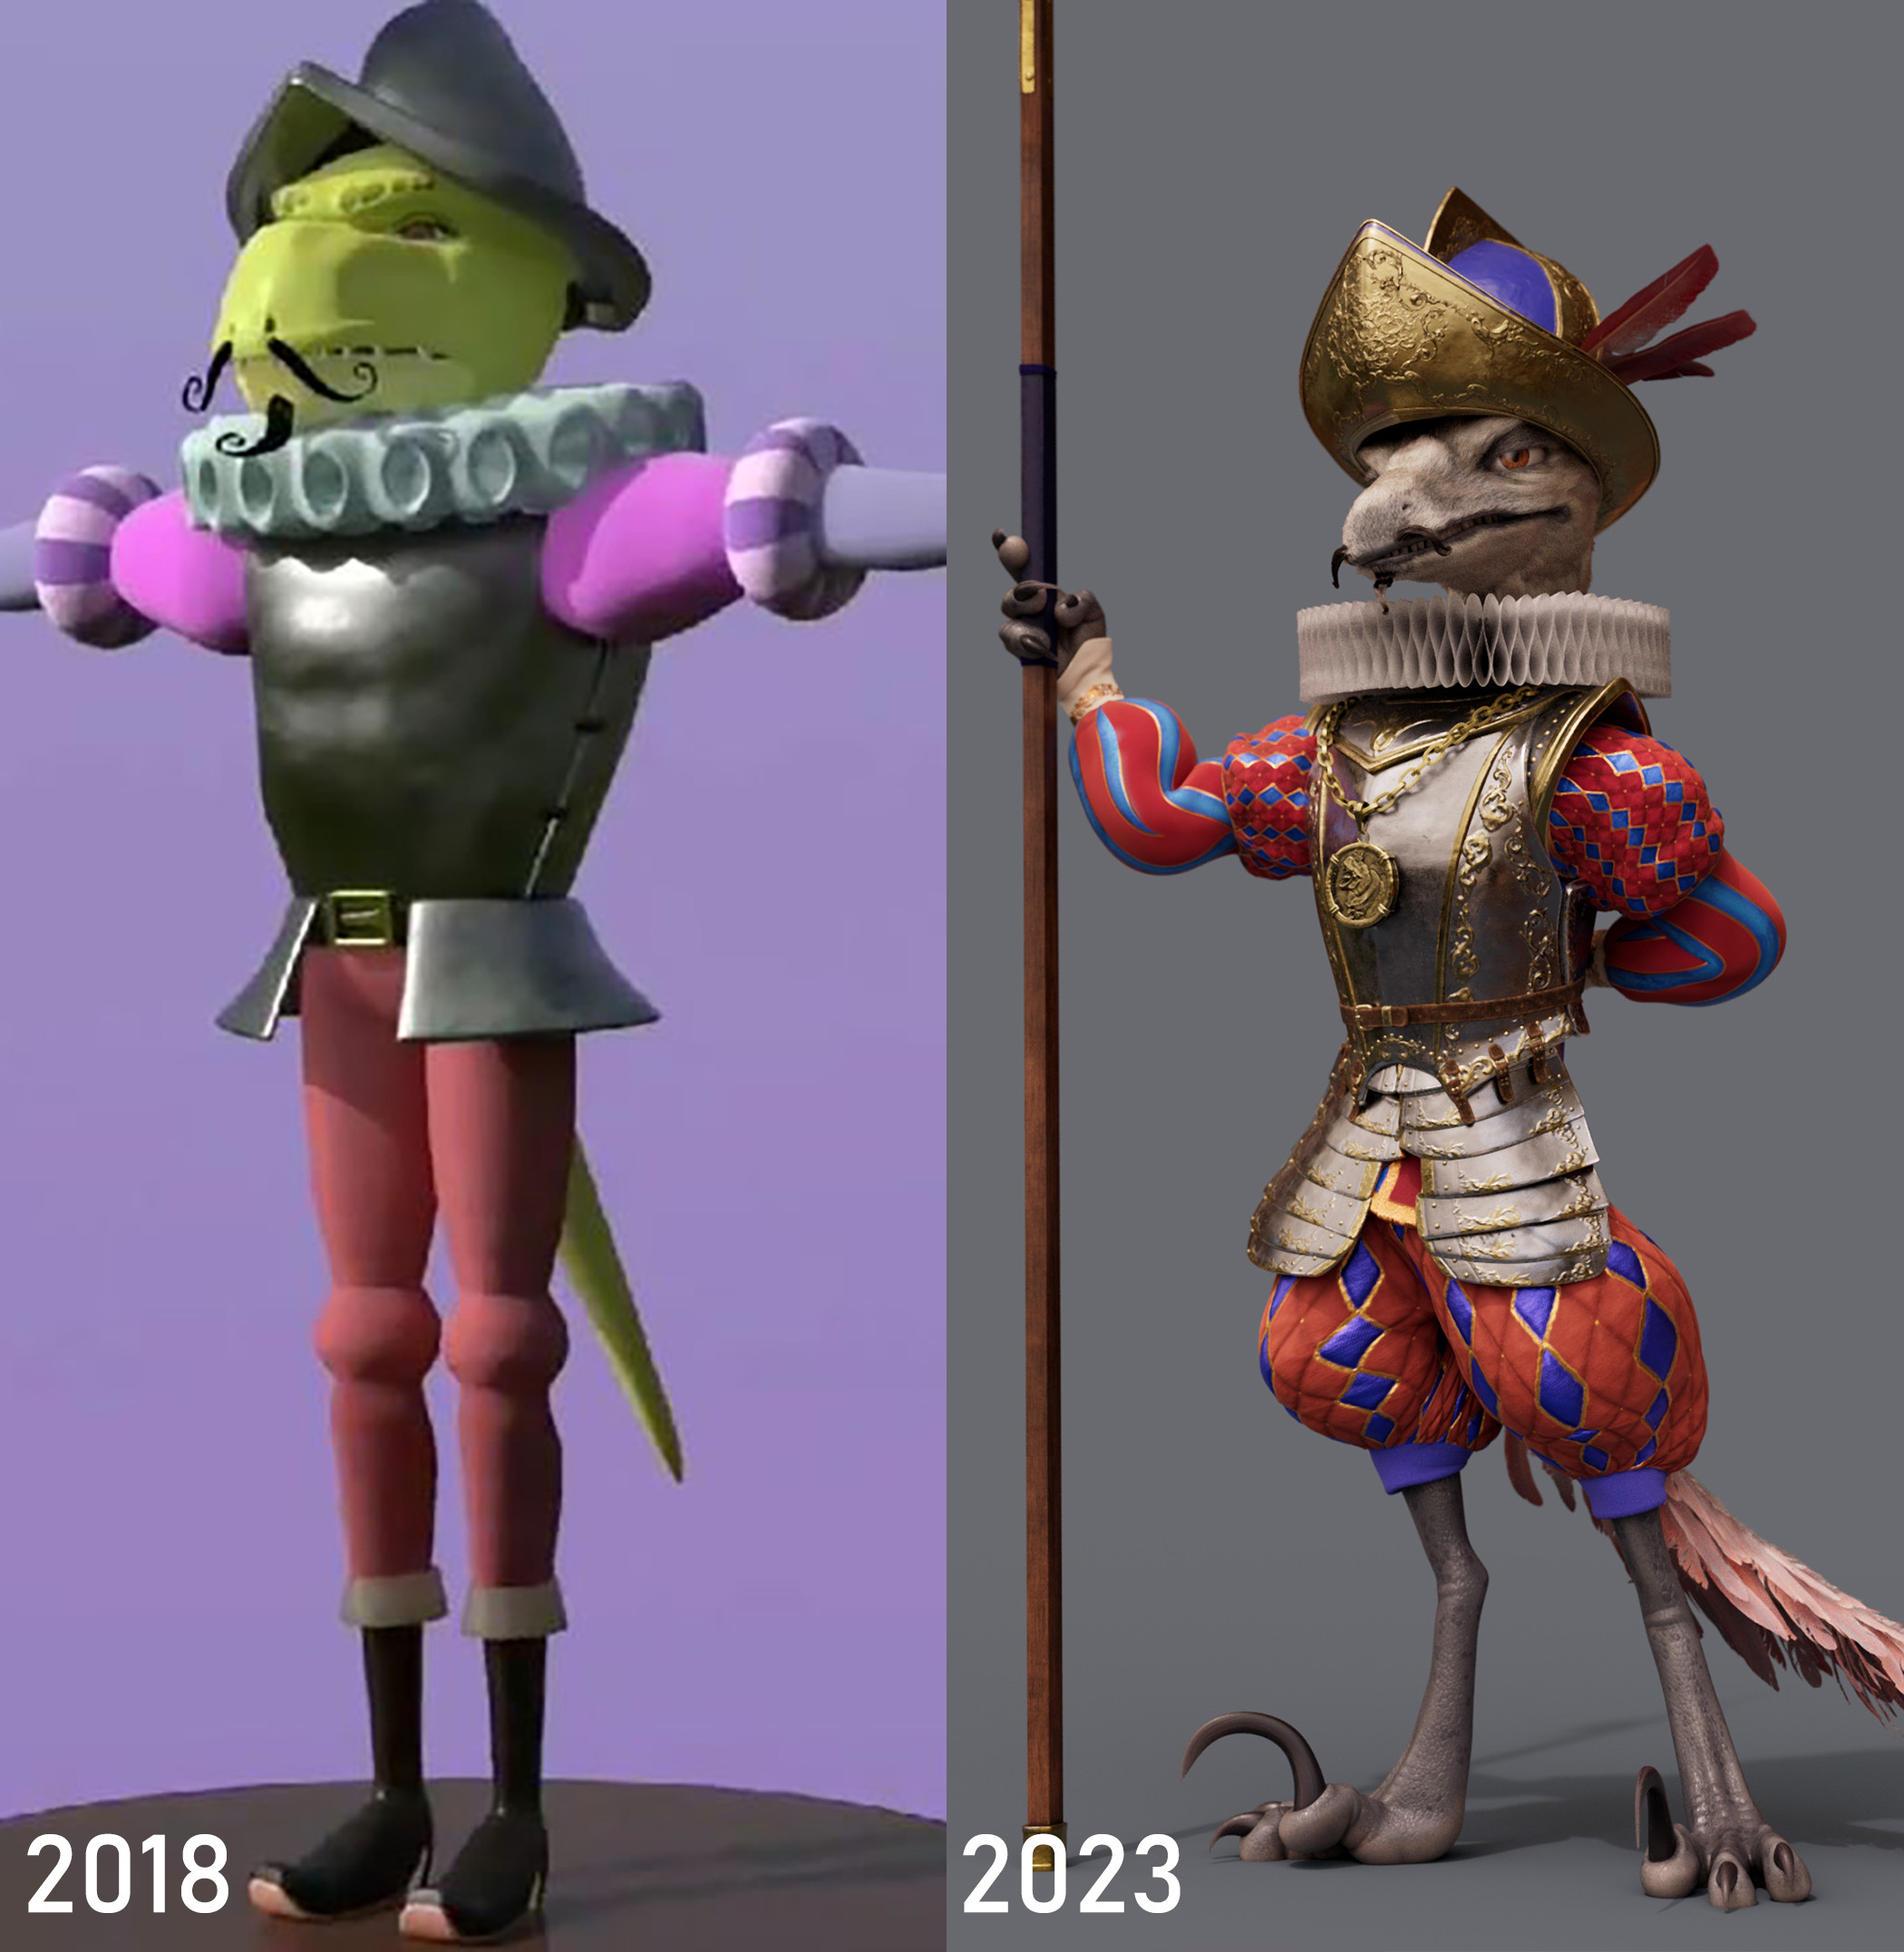 Comparison of the newest and oldest versions of the character concept